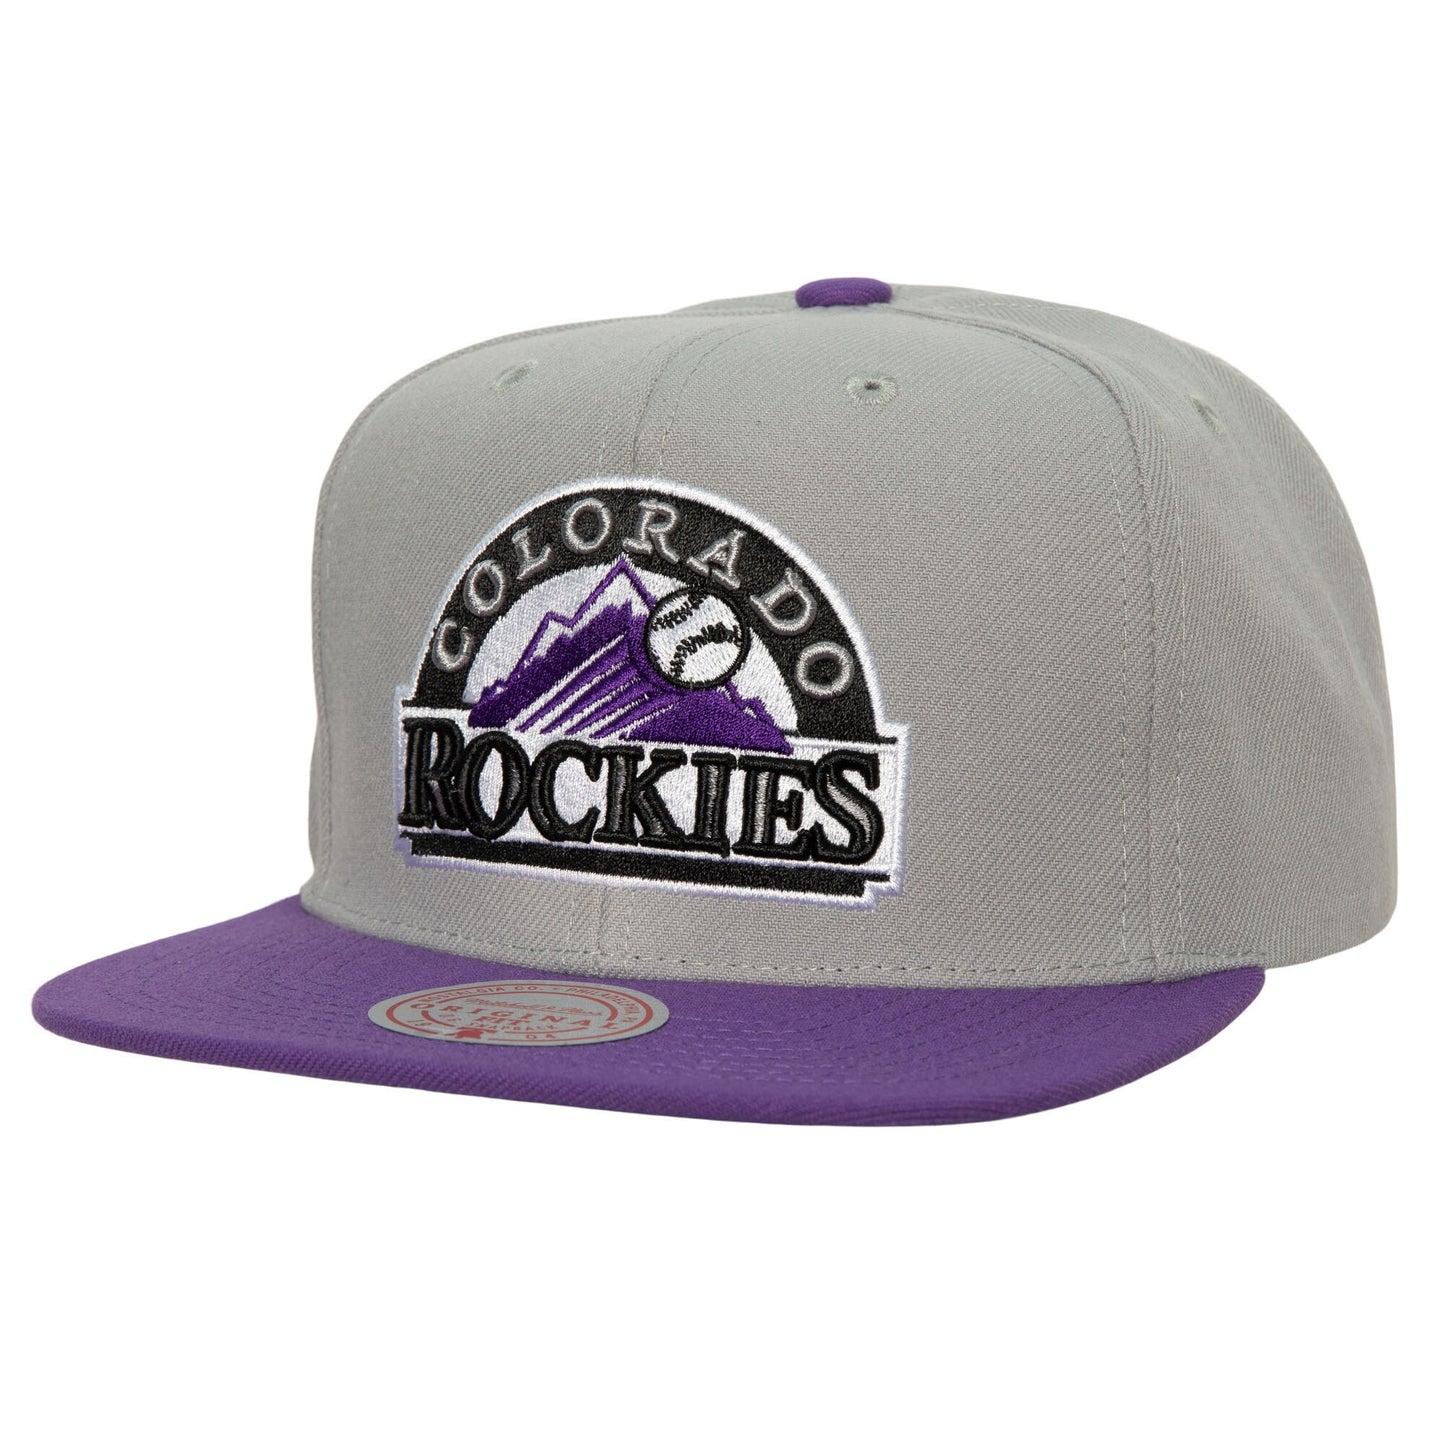 Colorado Rockies Mitchell & Ness Cooperstown Collection Away Snapback Hat - Gray